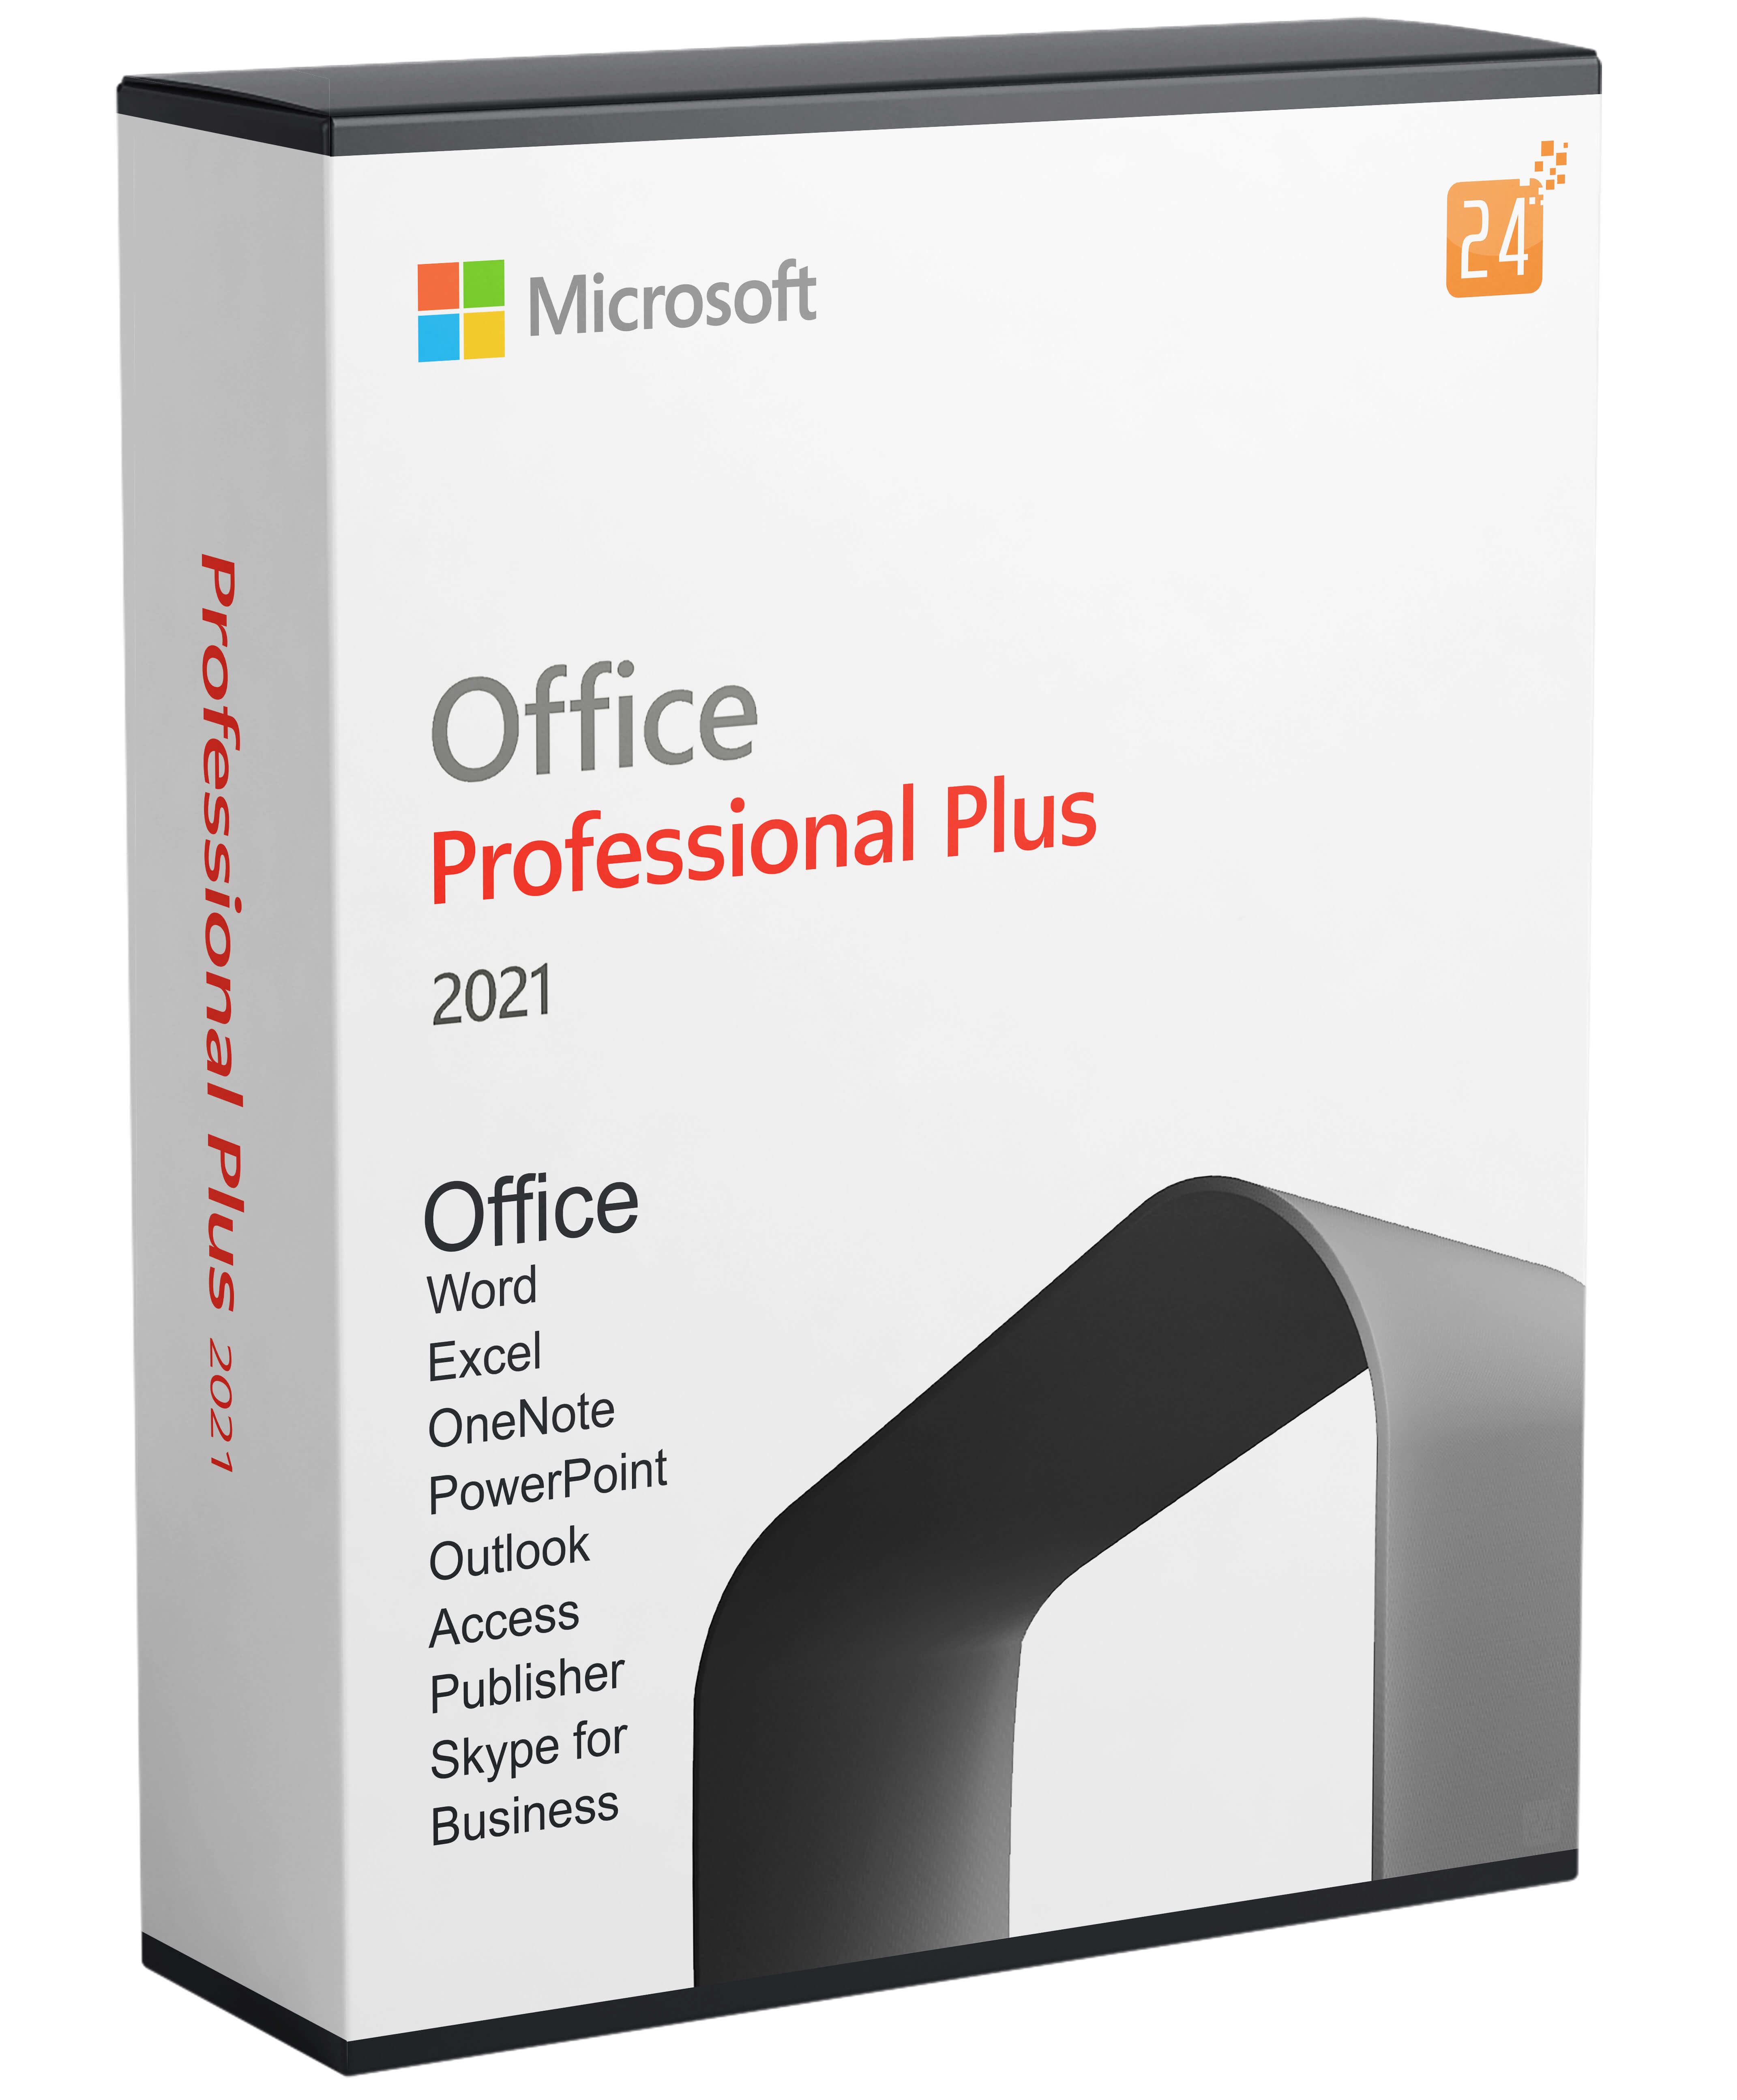 Microsoft Office 2021 Professional Plus | Blitzhandel24 - Buy quality  software in the online shop